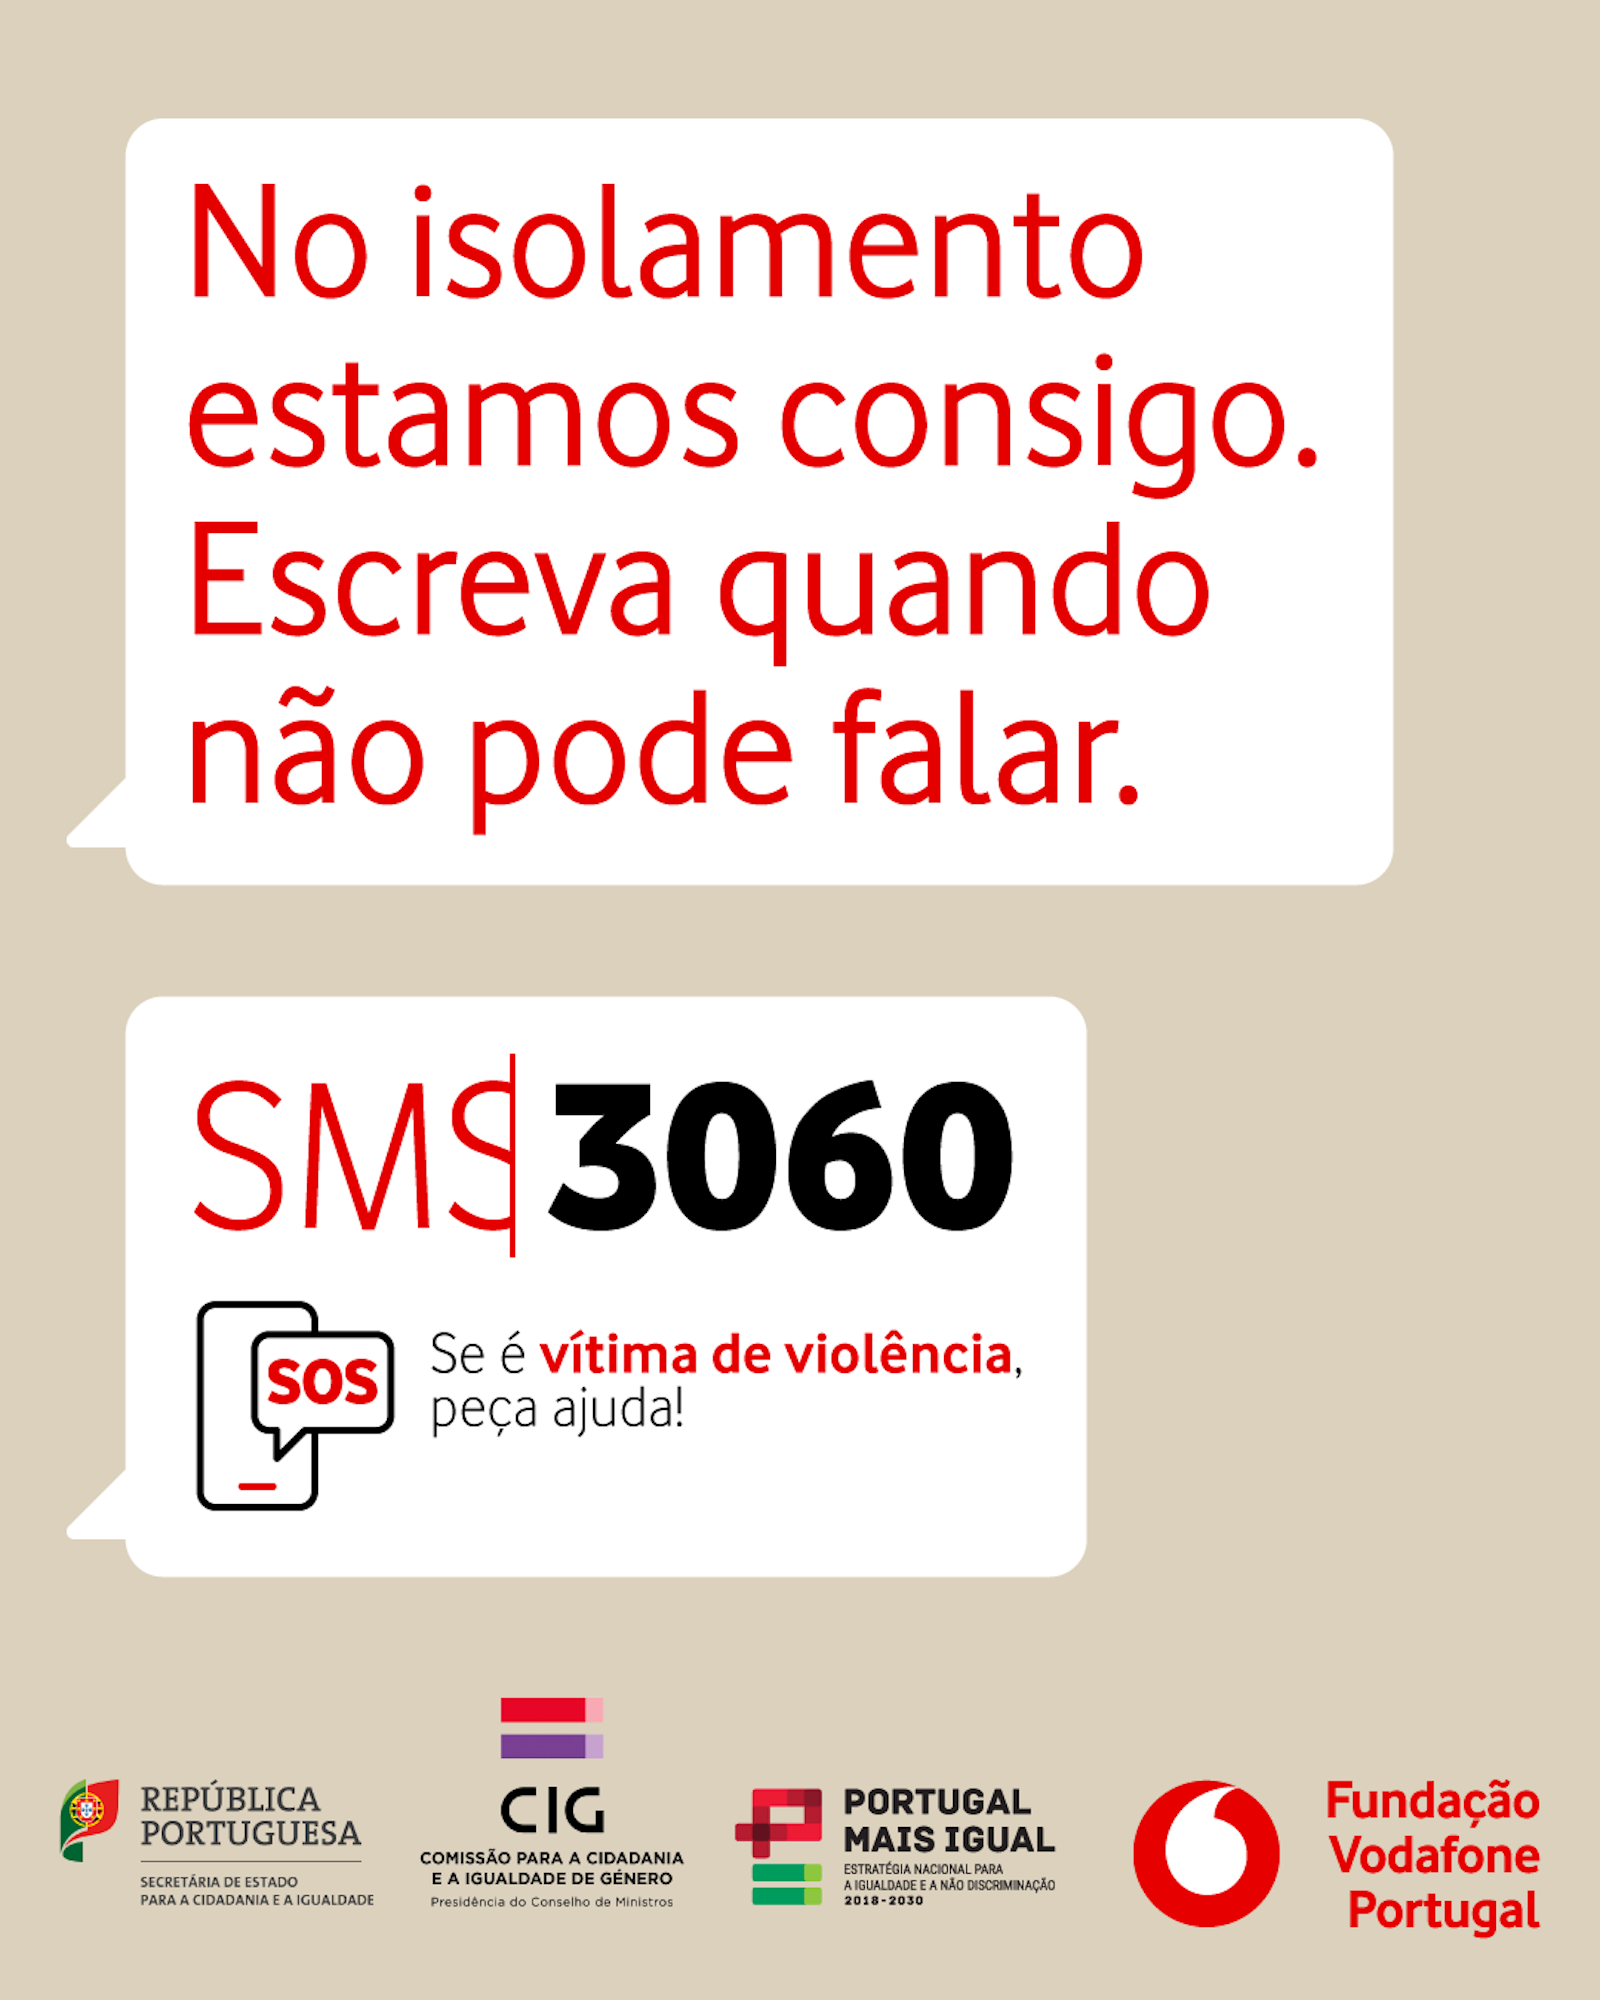 vodafone-foundation-apps-against-abuse-3060-sms-line 0